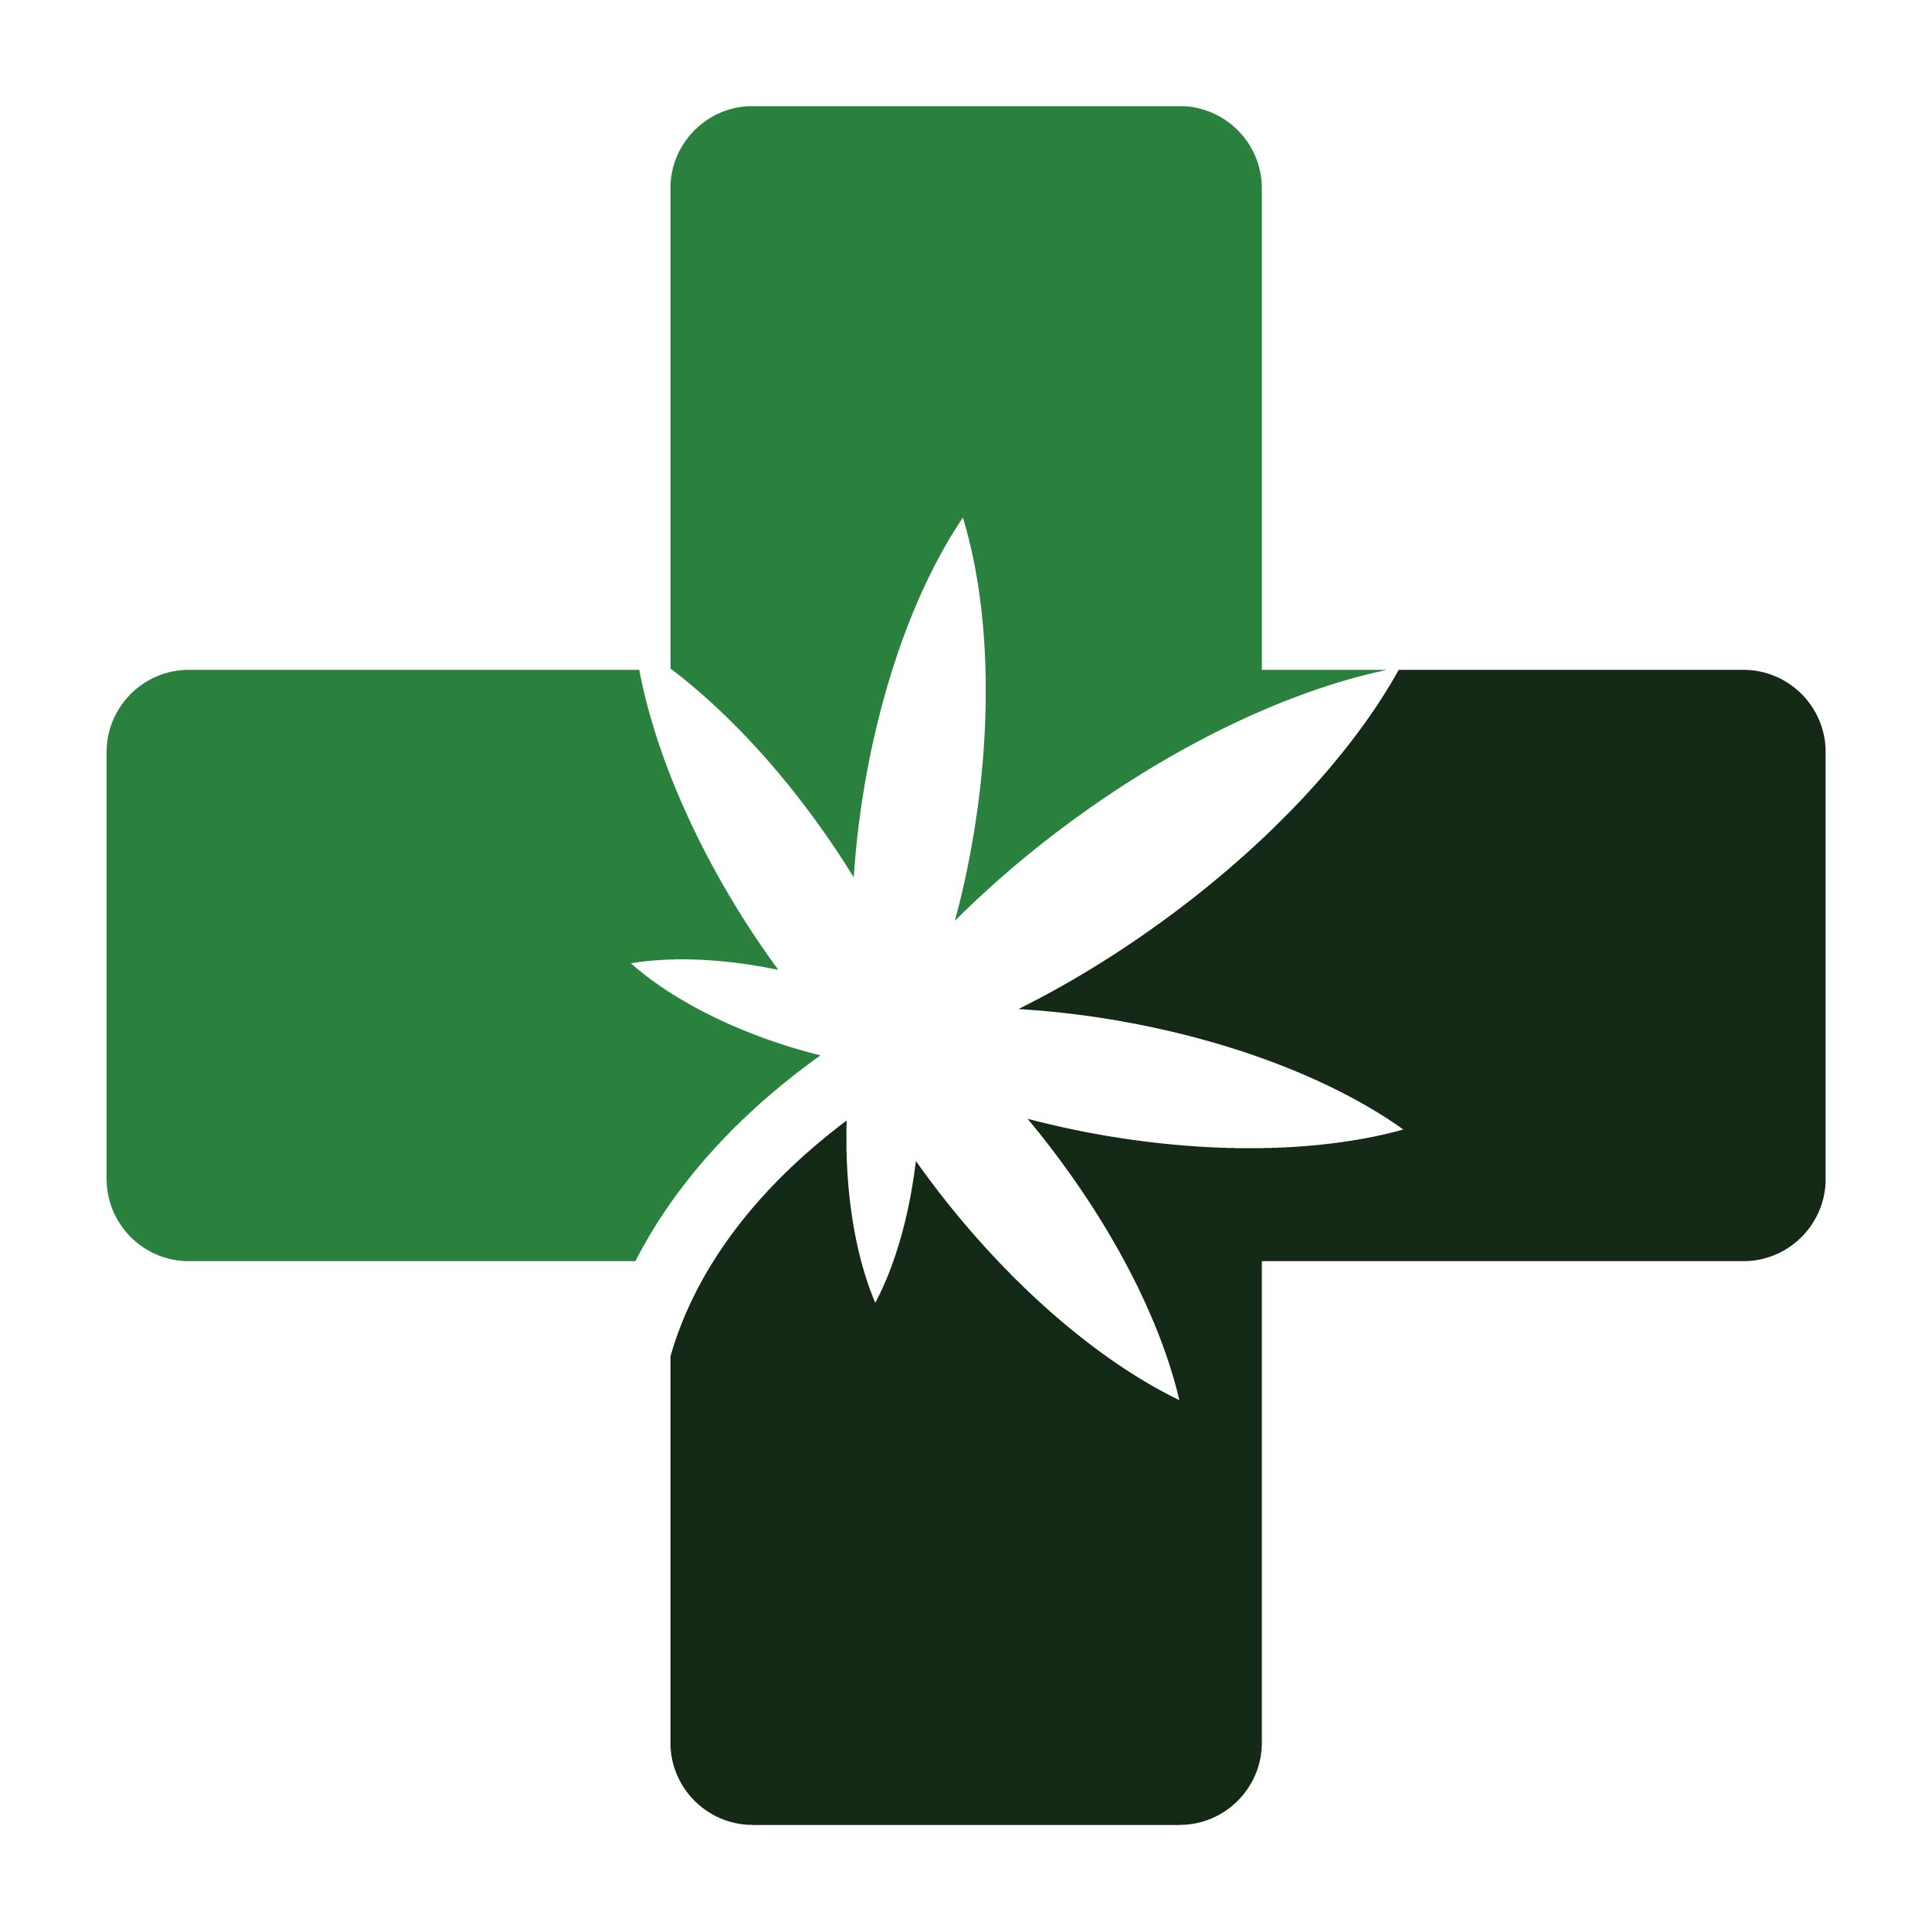 ARCannabisClinic is your trusted source for #marijuanacards and access to #marijuana dispensaries, serving patients in over 20+ states. Come see why we are #1!